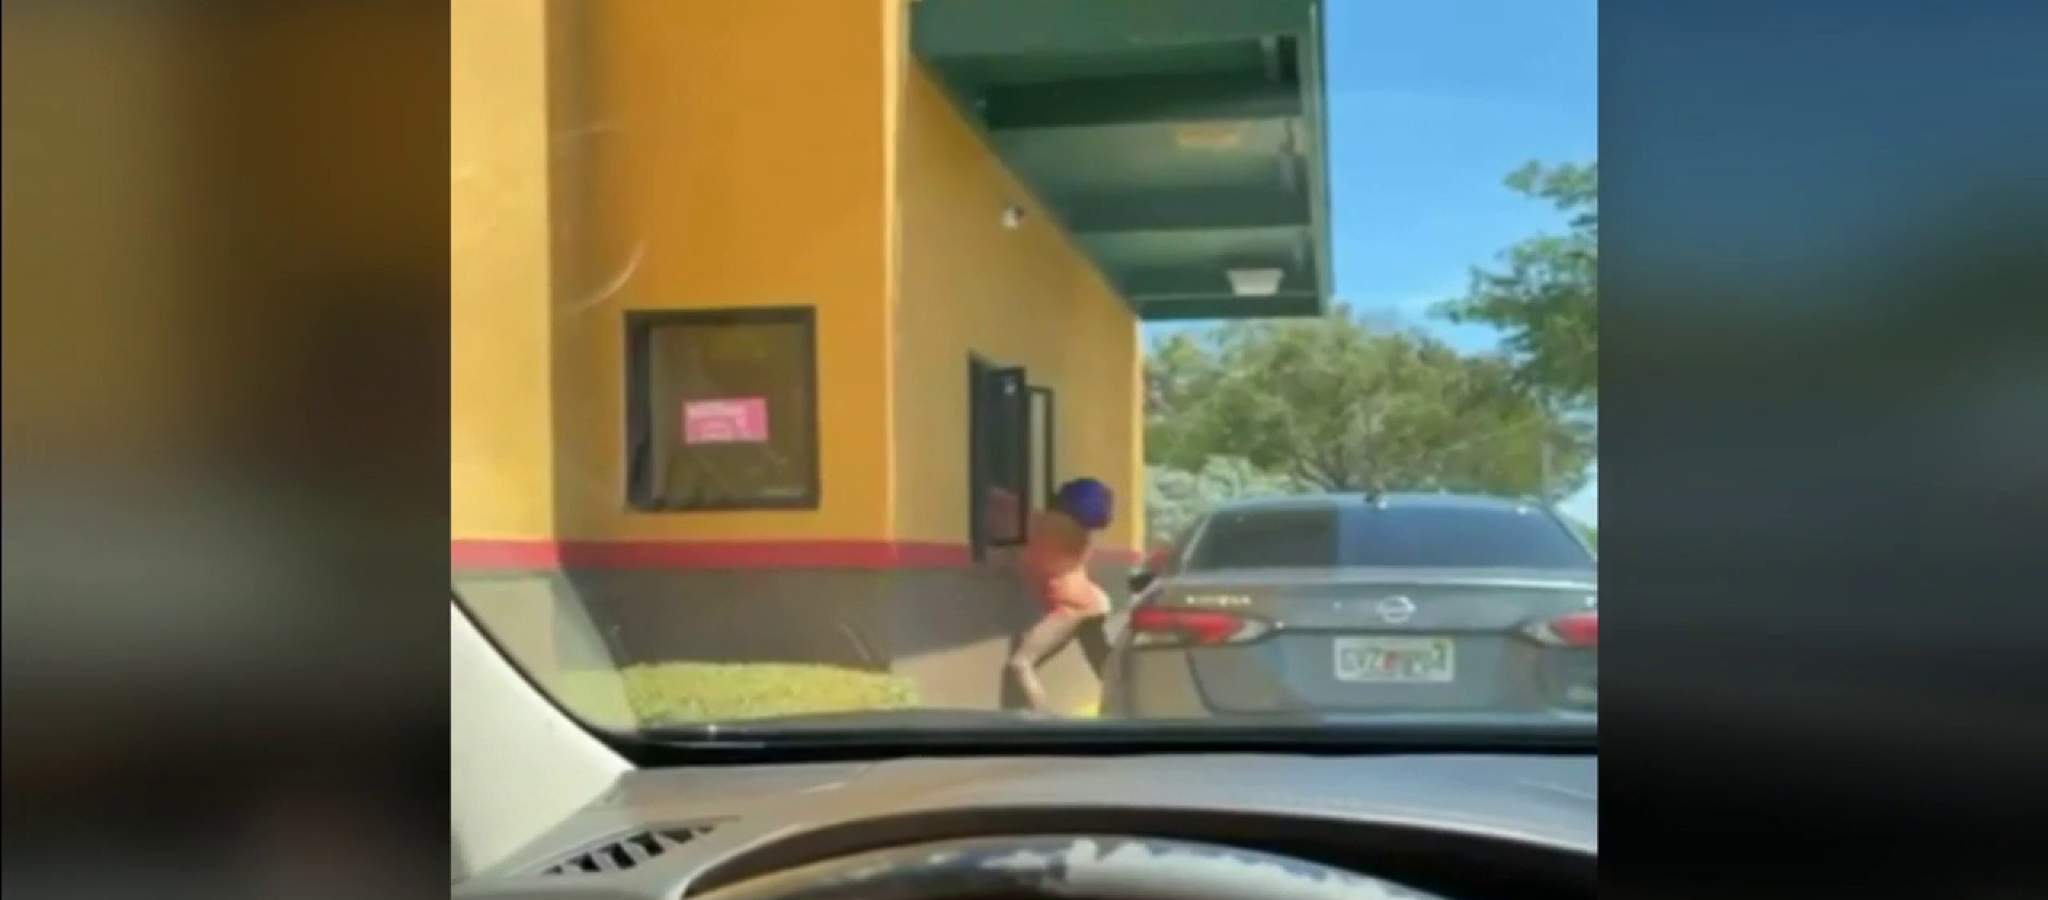 Women attack employees during robbery at Popeyes drive-thru